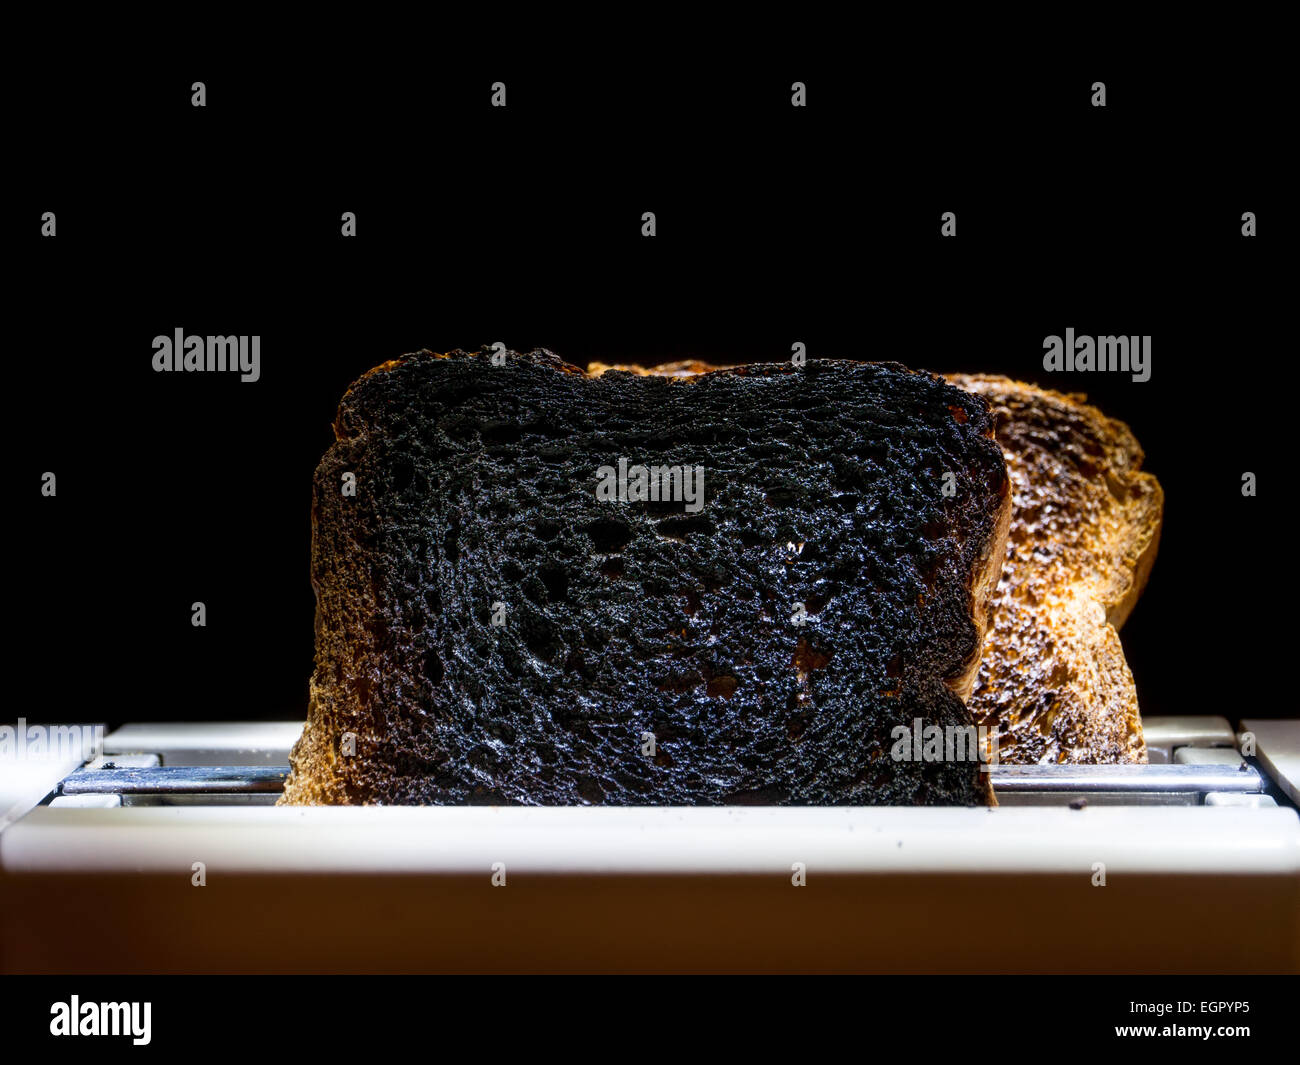 Two burnt toast slices sticking out of toaster over black background Stock Photo